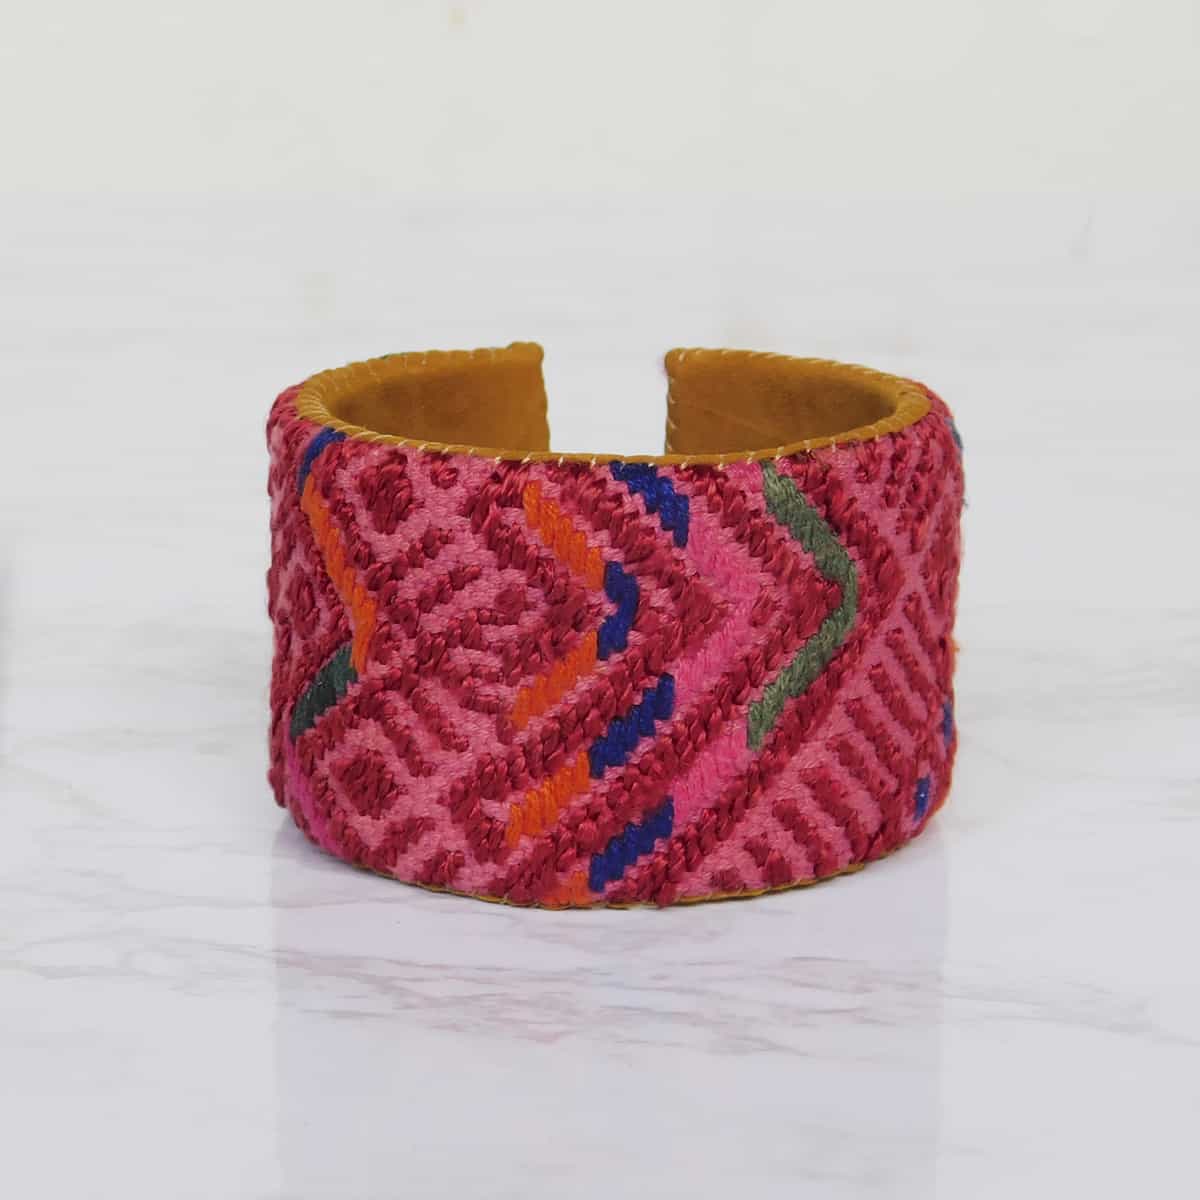 red cuff bracelet with hand woven huipil fabric on a leather backing